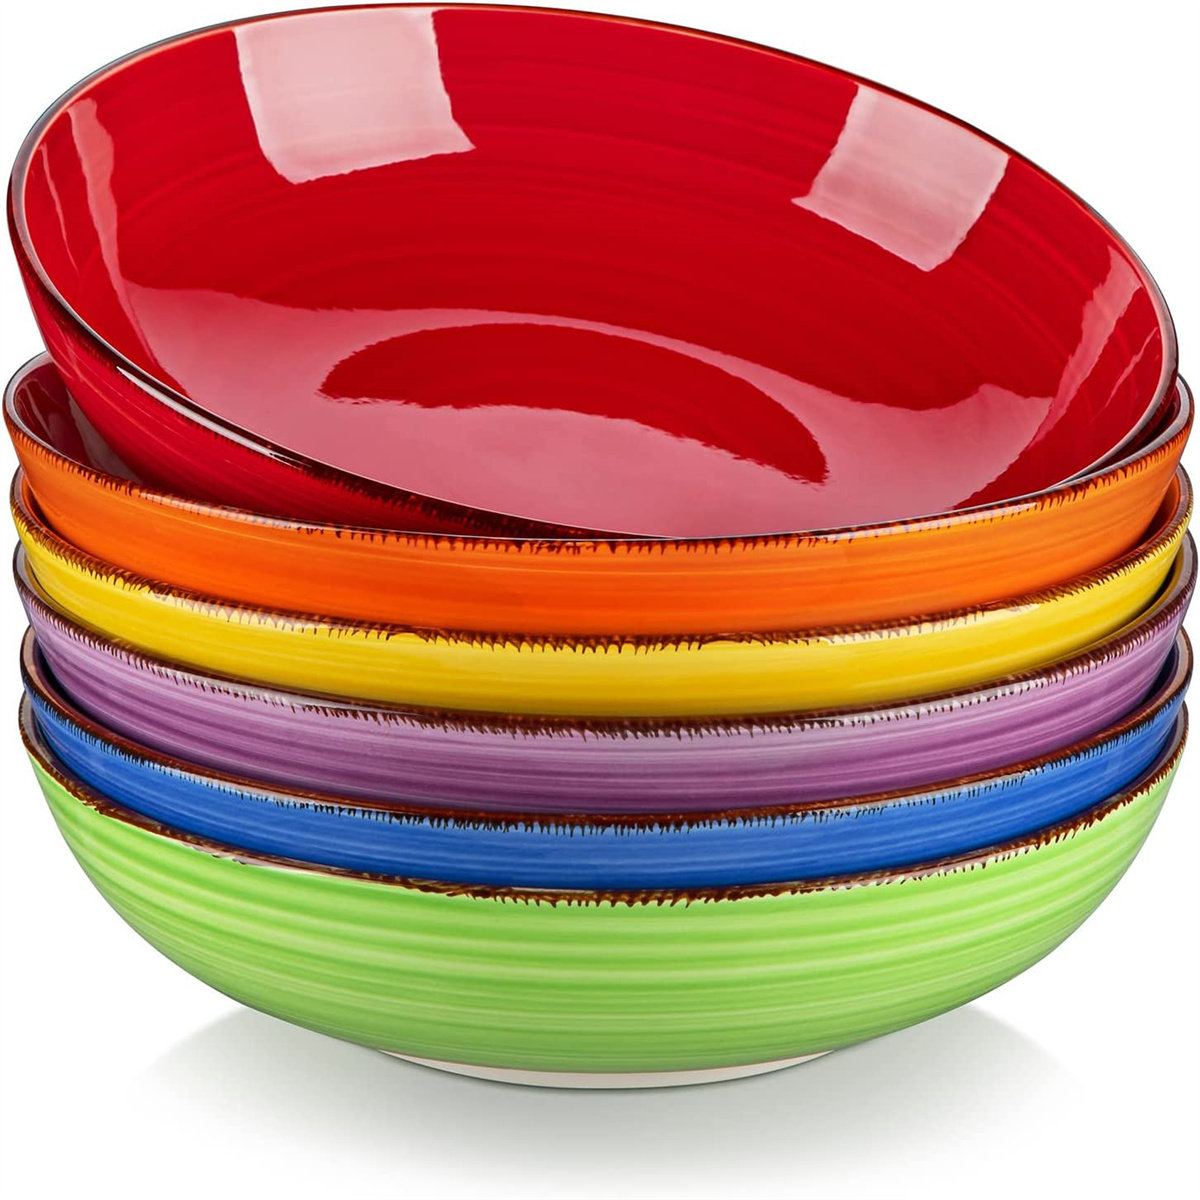 The Serving Bowl, Ceramic Bowls With Different Colors